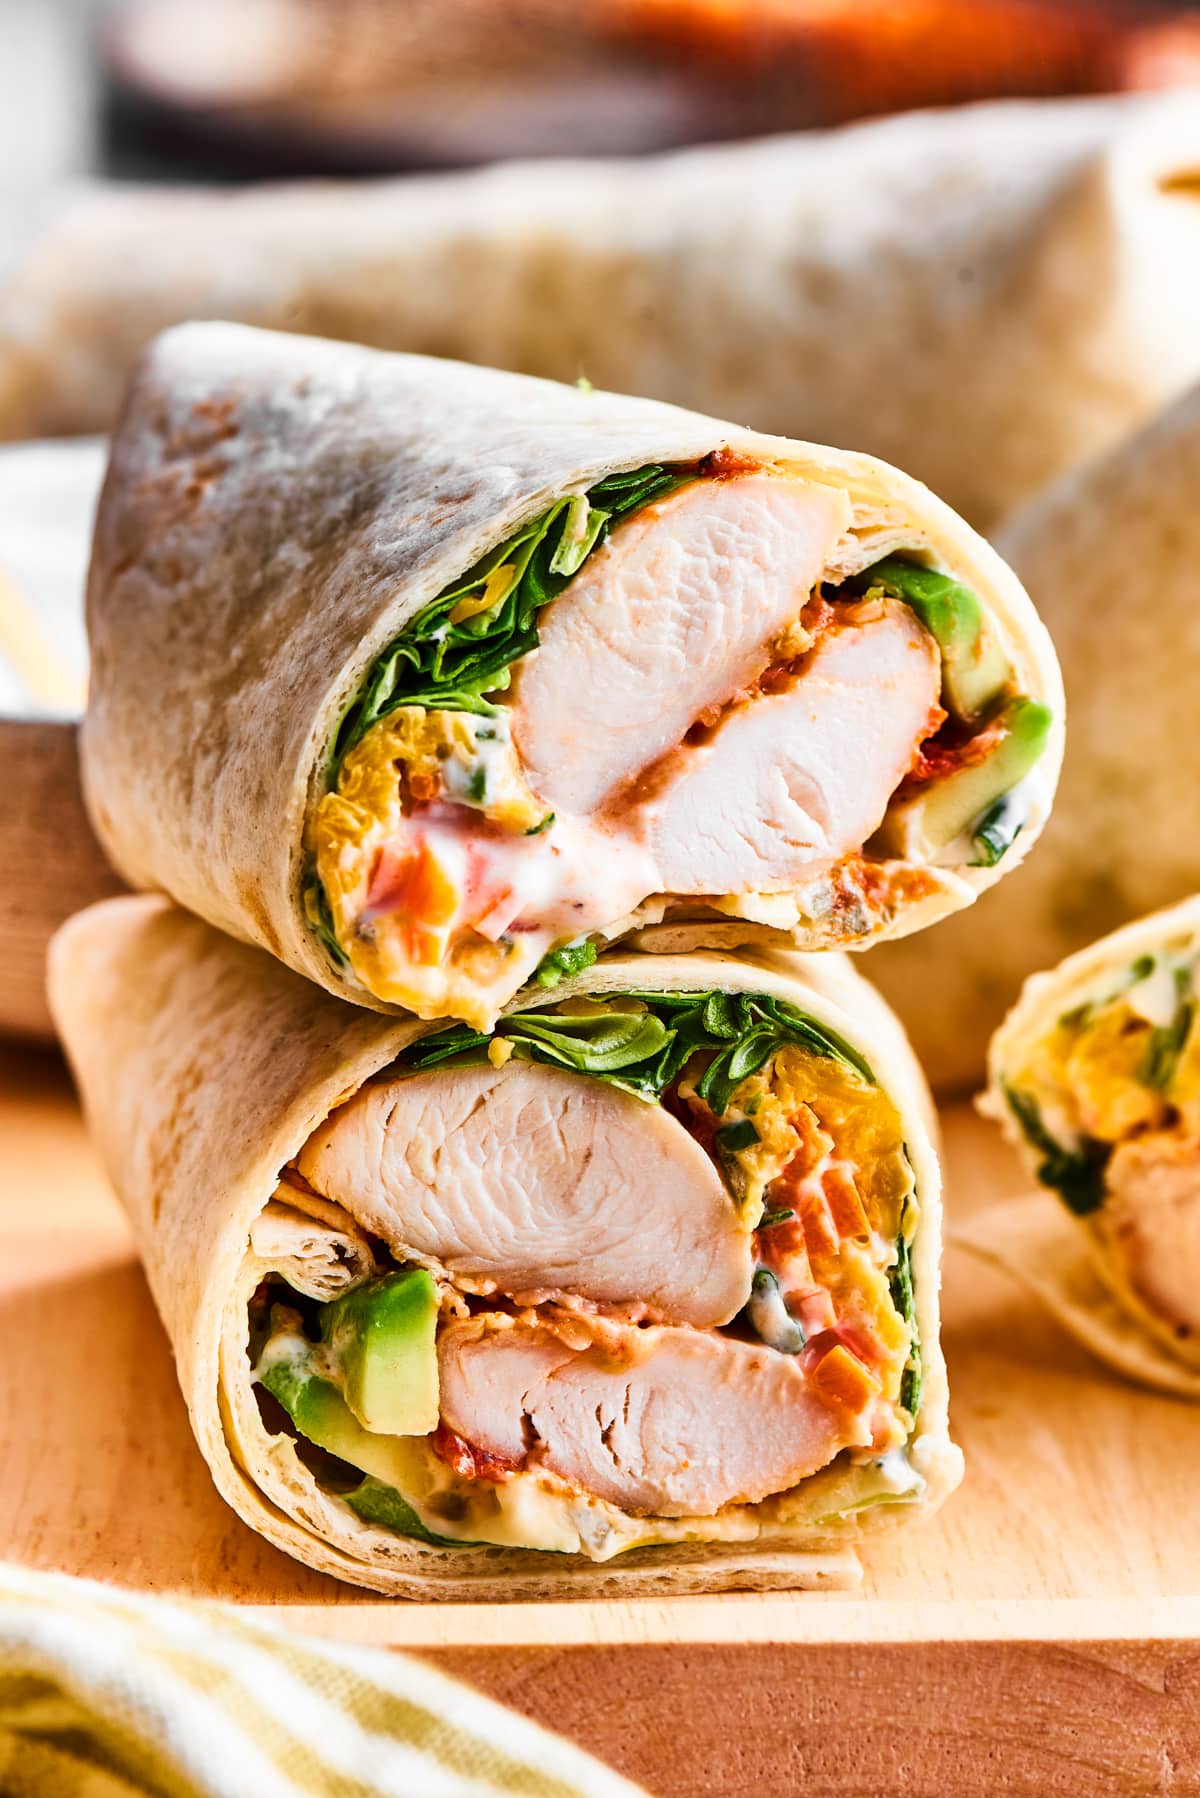 Cooked chicken plus lettuce, cheese, and avocado wrapped in a tortilla.